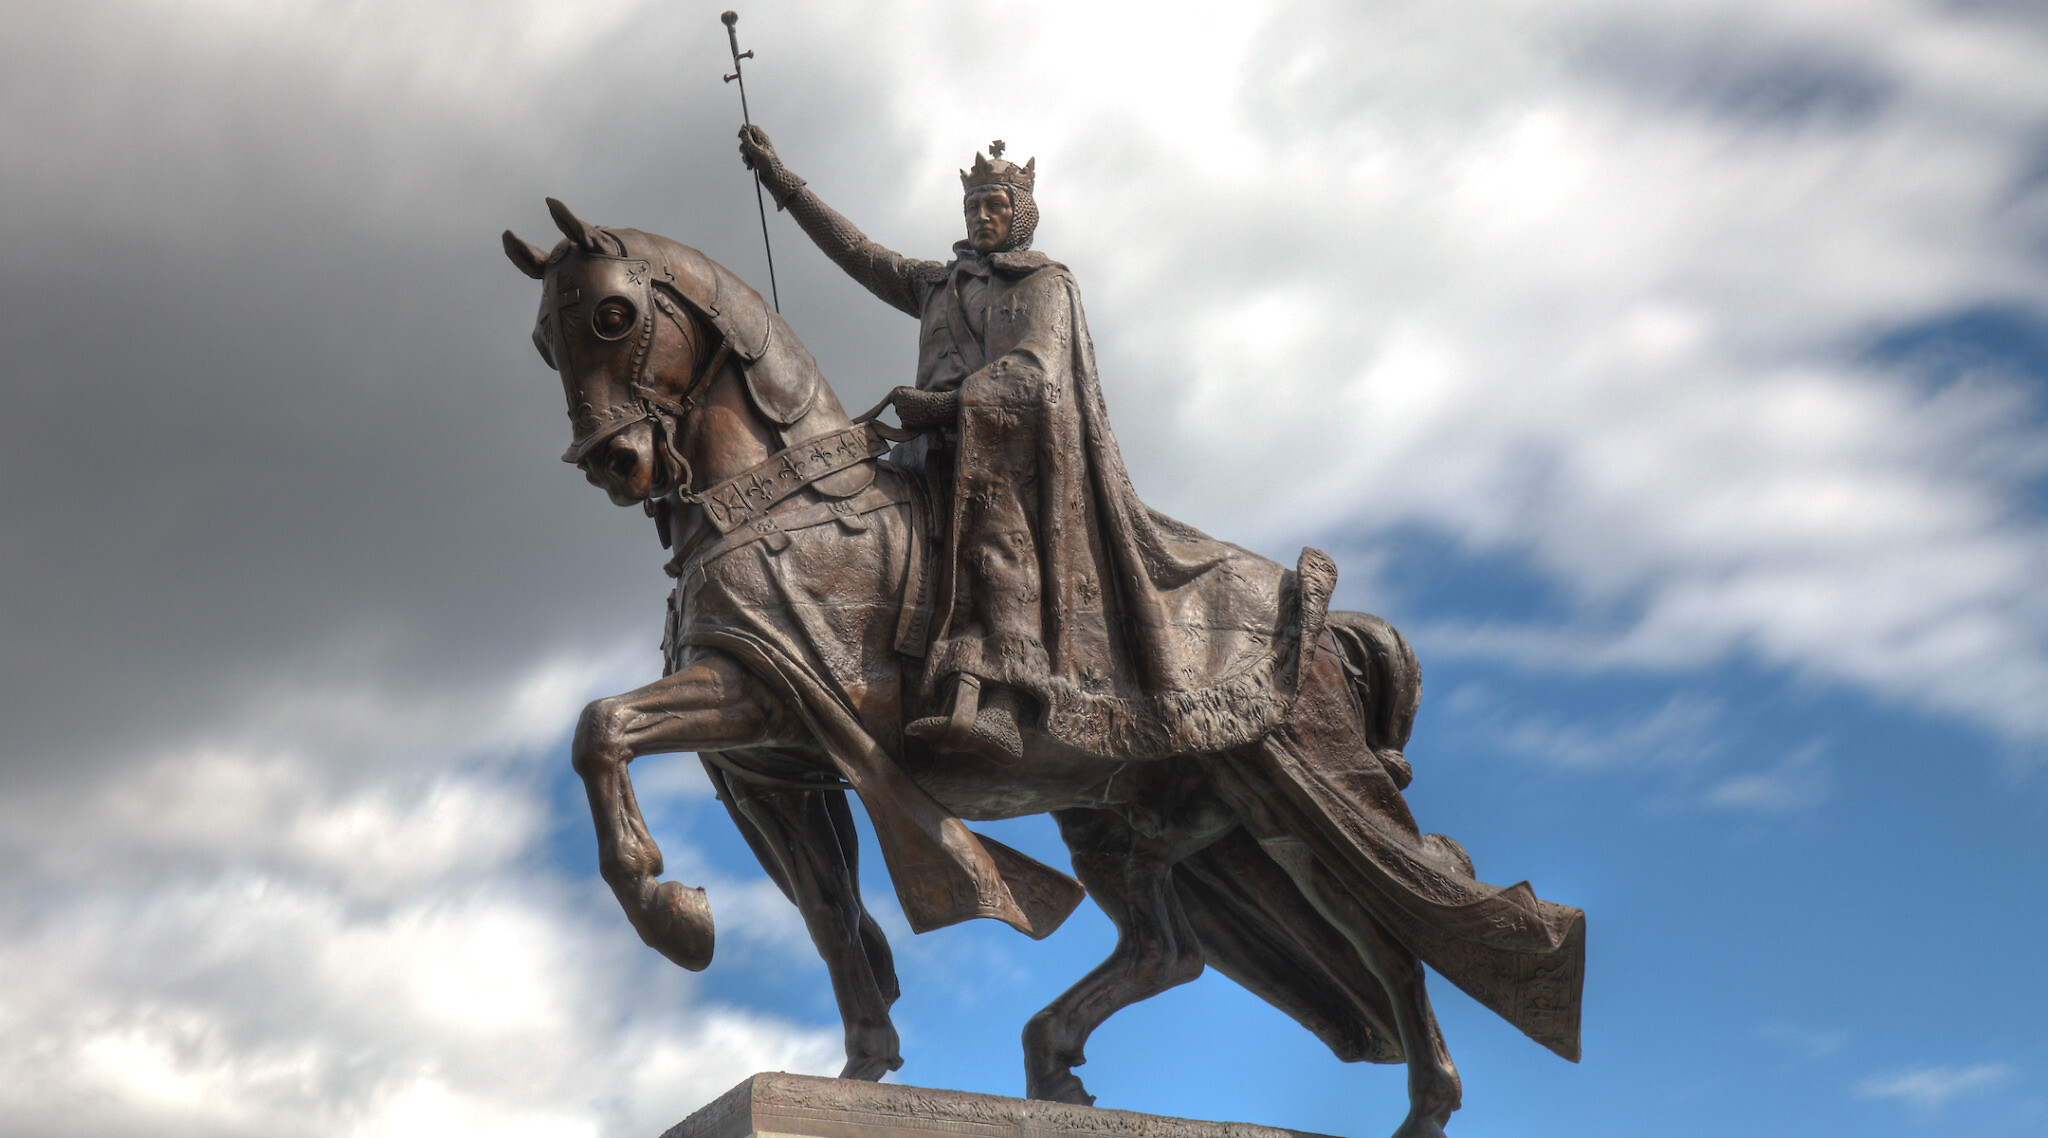 History of St. Louis IX reveals love for poor, justice — and a